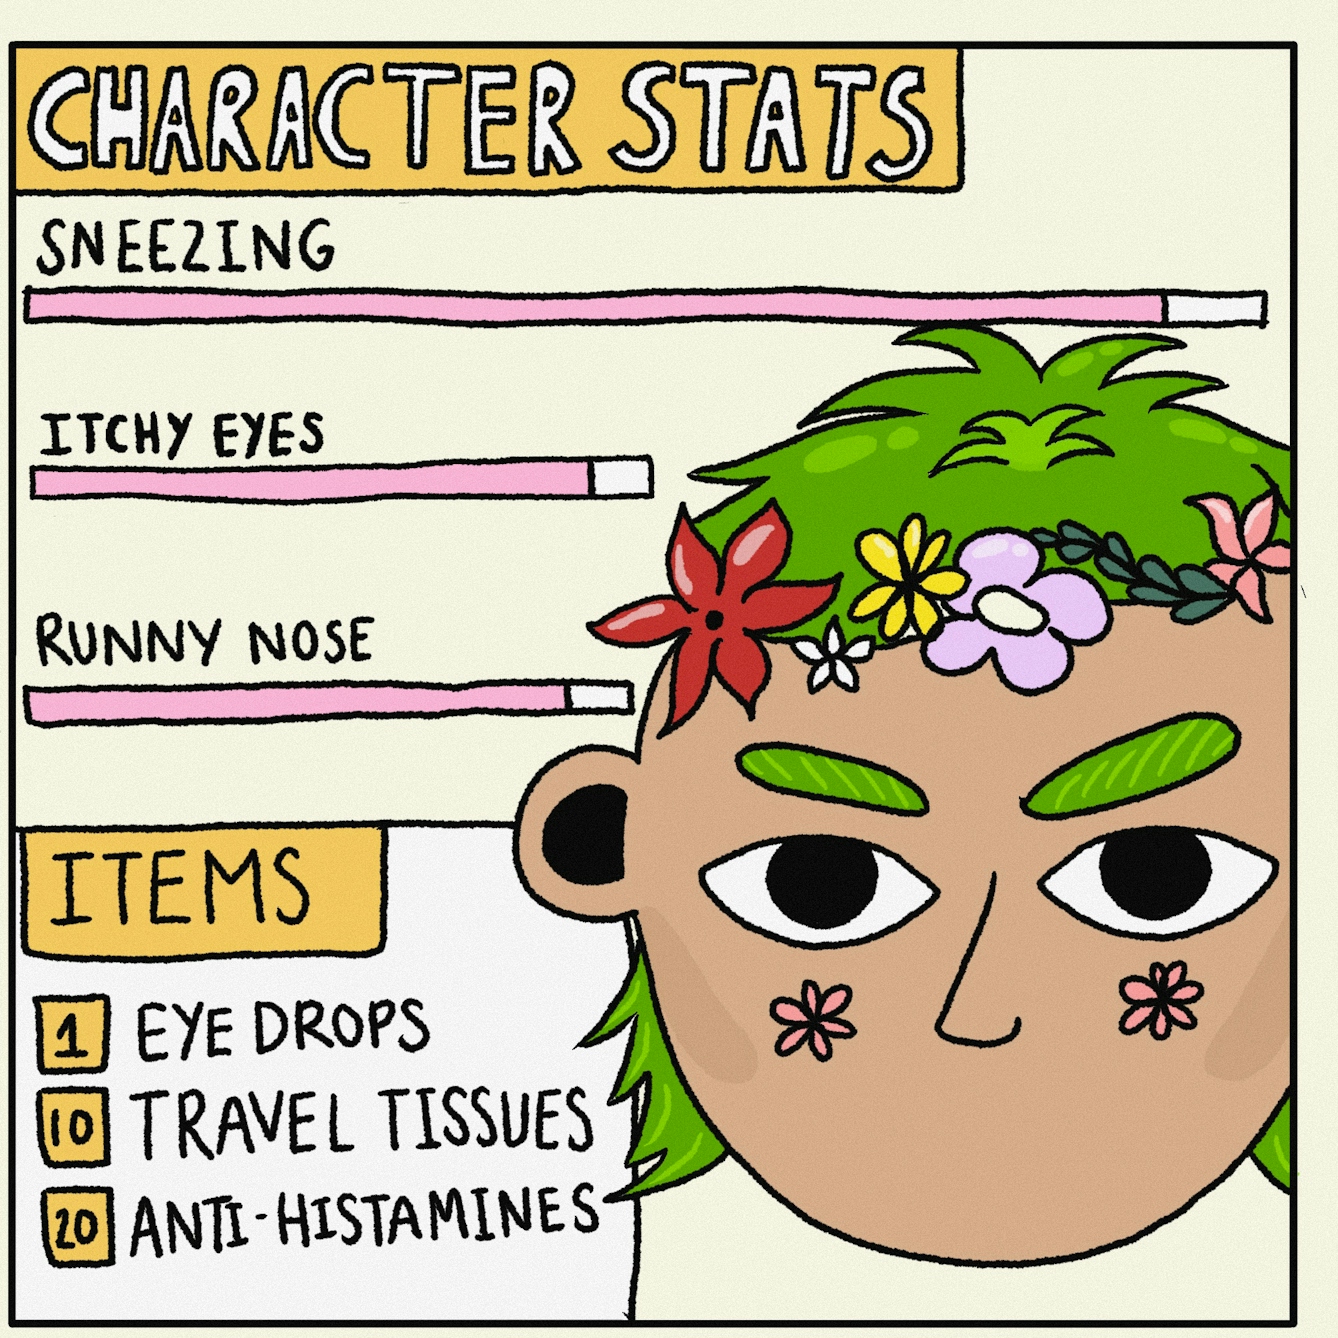 Panel 2 of a digitally drawn, four-panel comic titled ‘Nope’. The text at the top says ‘CHARACTER STATS’. The sliders show this character suffers badly with sneezing, itchy eyes and a runny nose, and carries eye drops, travel tissues and lots of anti-histamine. 